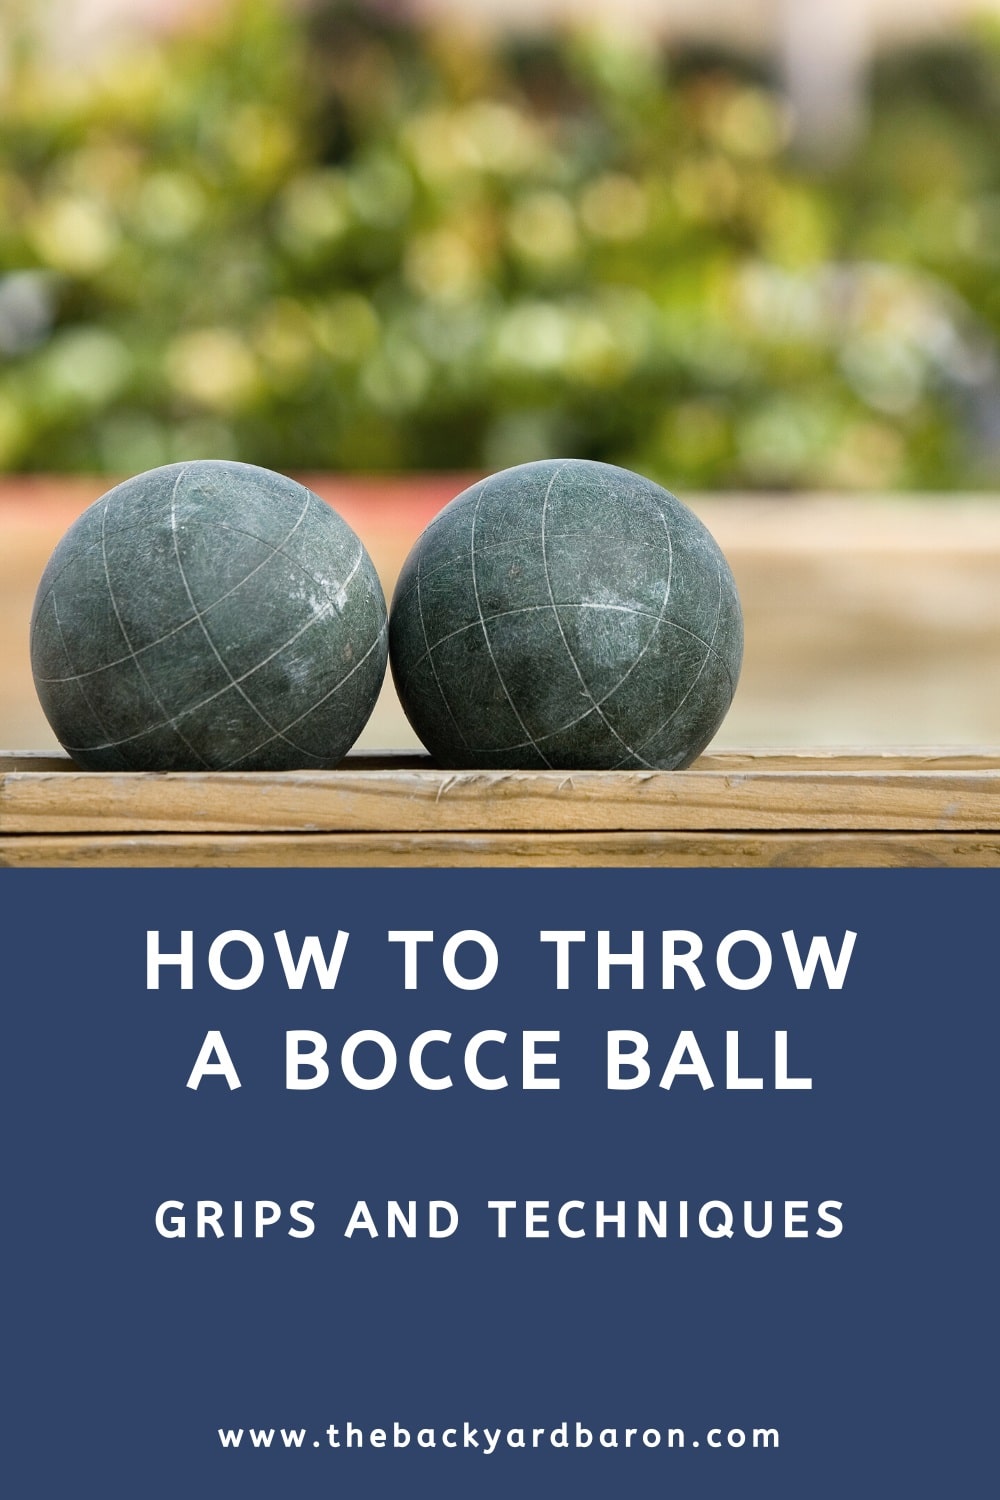 How to throw a bocce ball (grips and techniques)